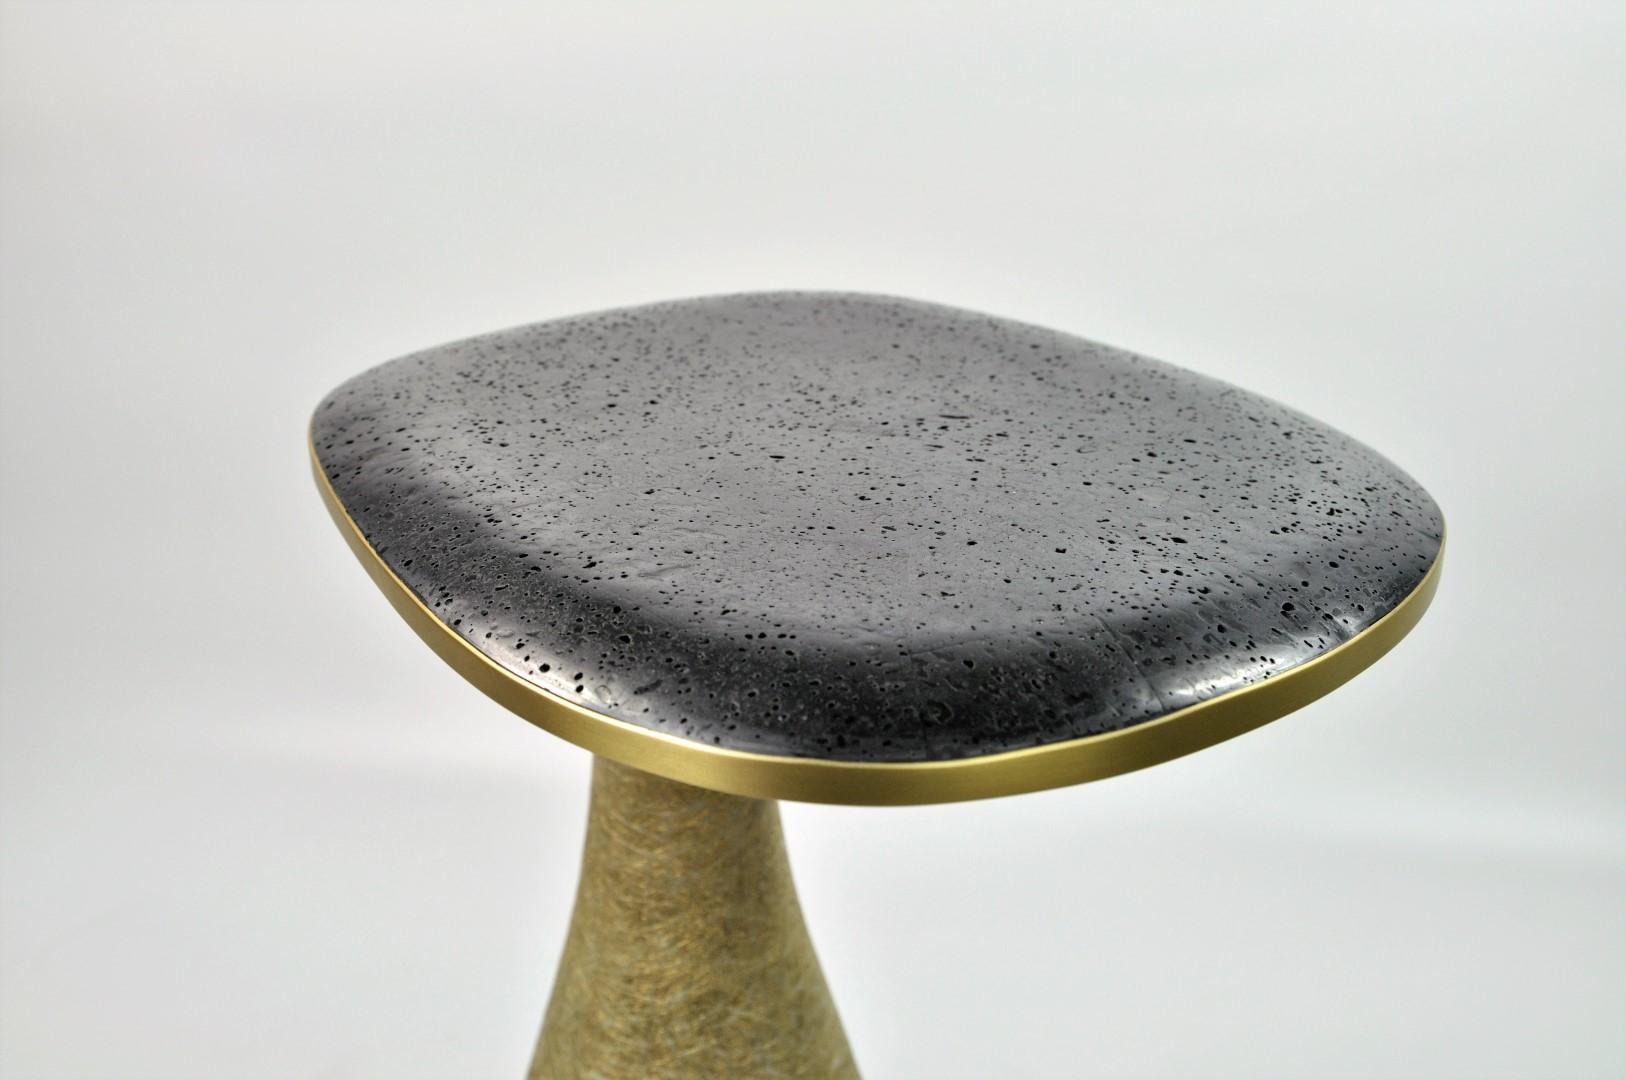 Organic Modern Set of Two Side Tables in Lava Stone with a Gilded Base